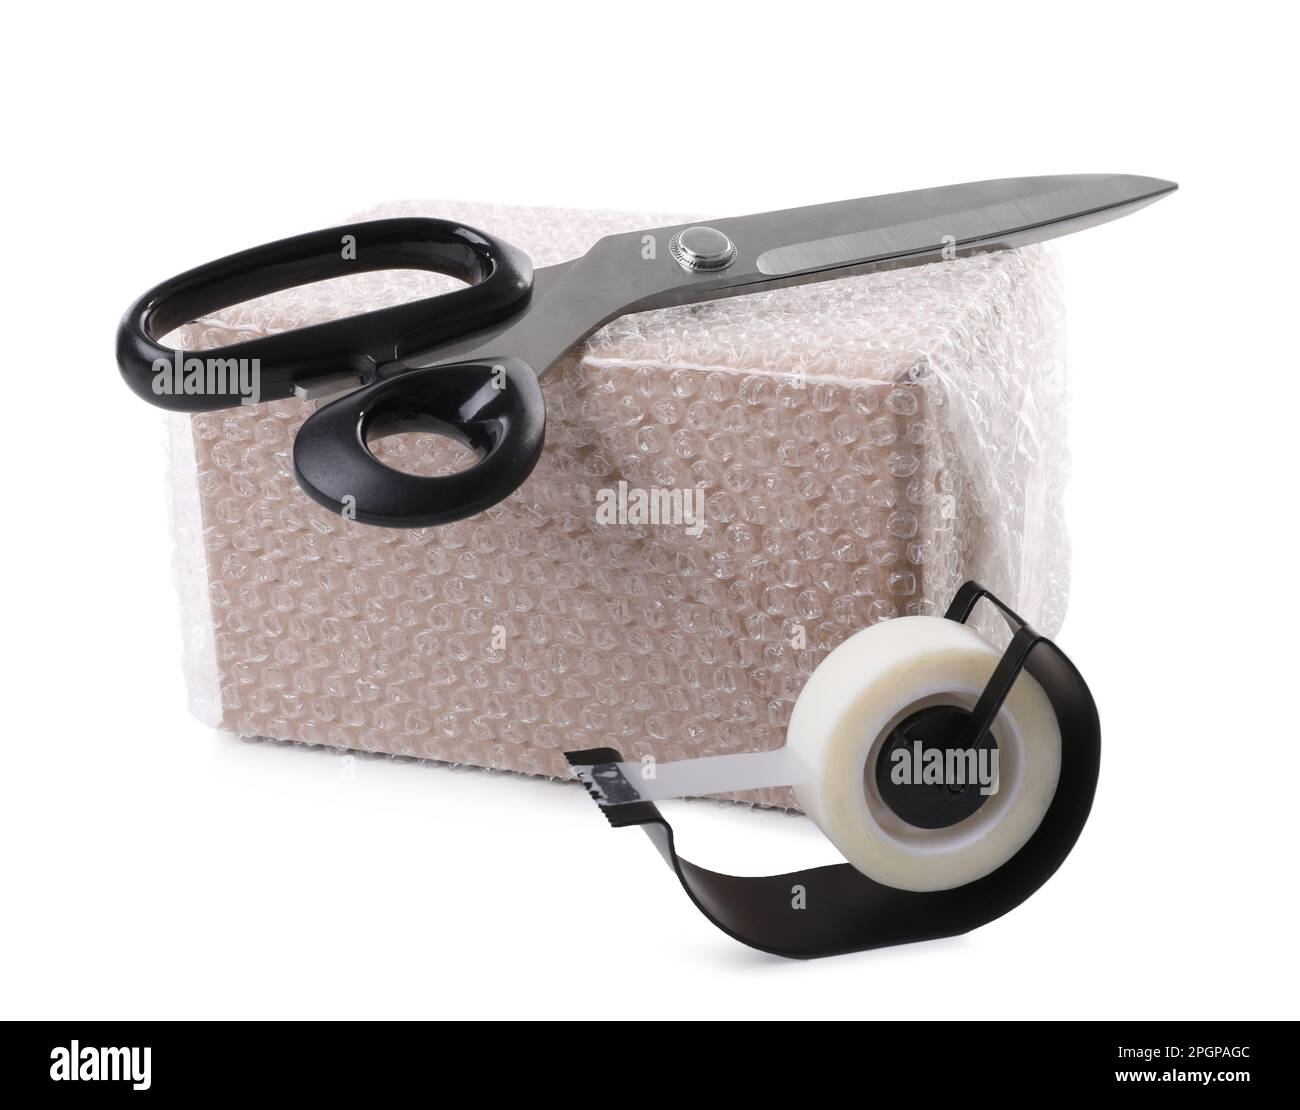 https://c8.alamy.com/comp/2PGPAGC/cardboard-box-packed-in-bubble-wrap-scissors-and-adhesive-tape-on-white-background-2PGPAGC.jpg